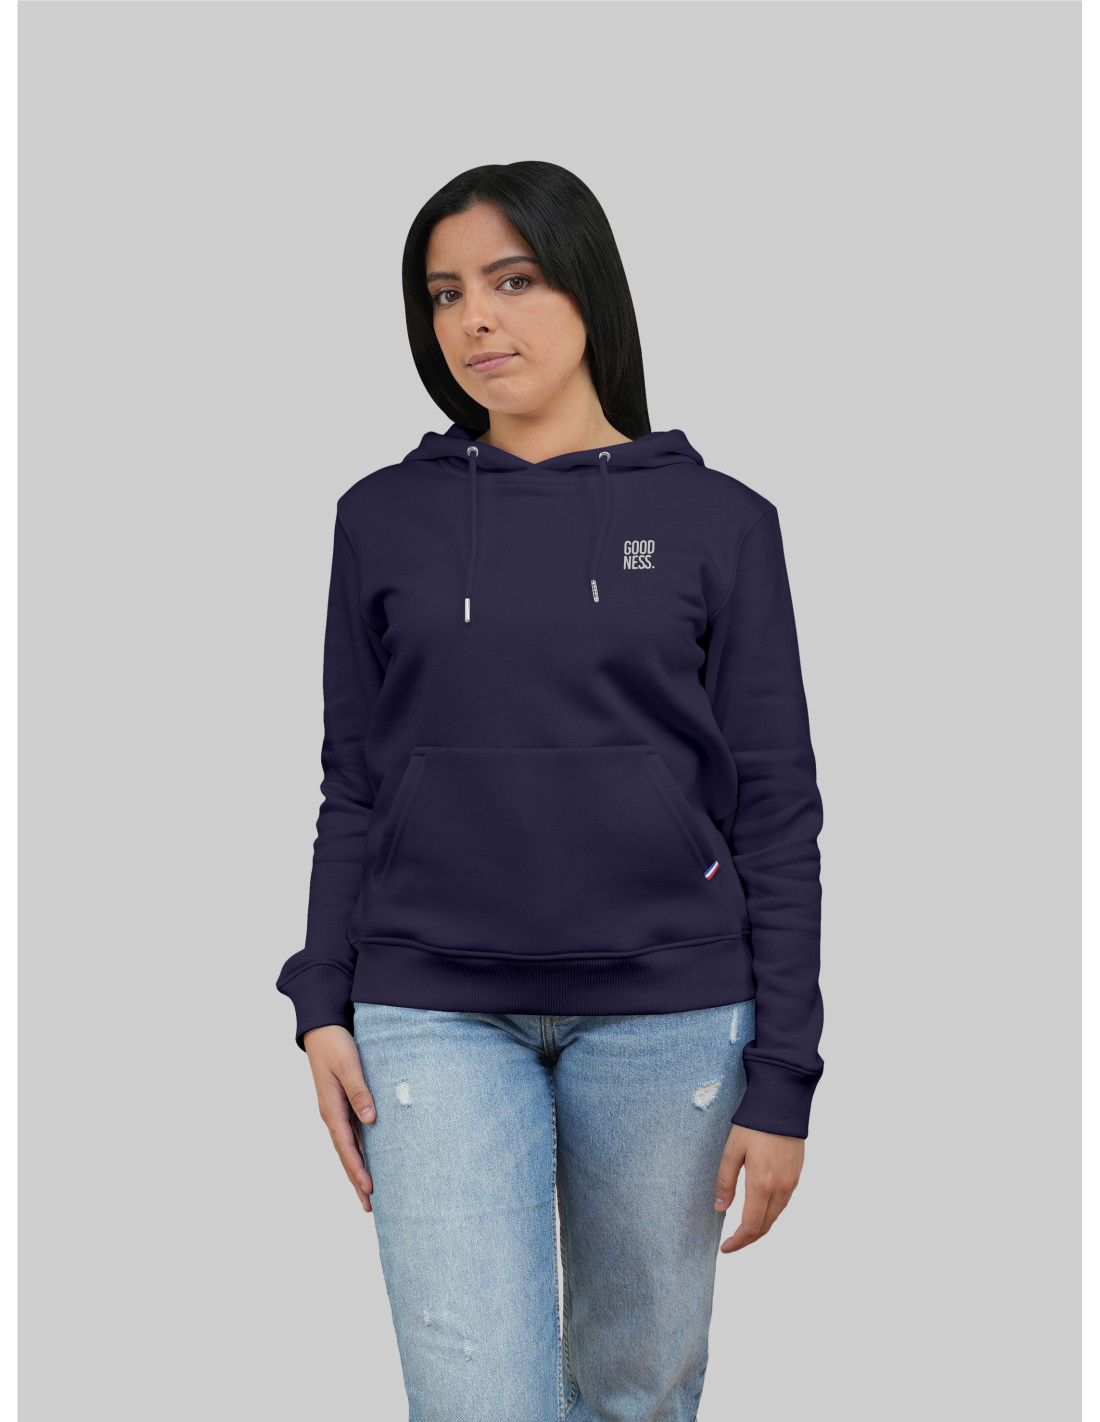 HOODIE FEMME MADE IN FRANCE BIO 300G LUCETTE